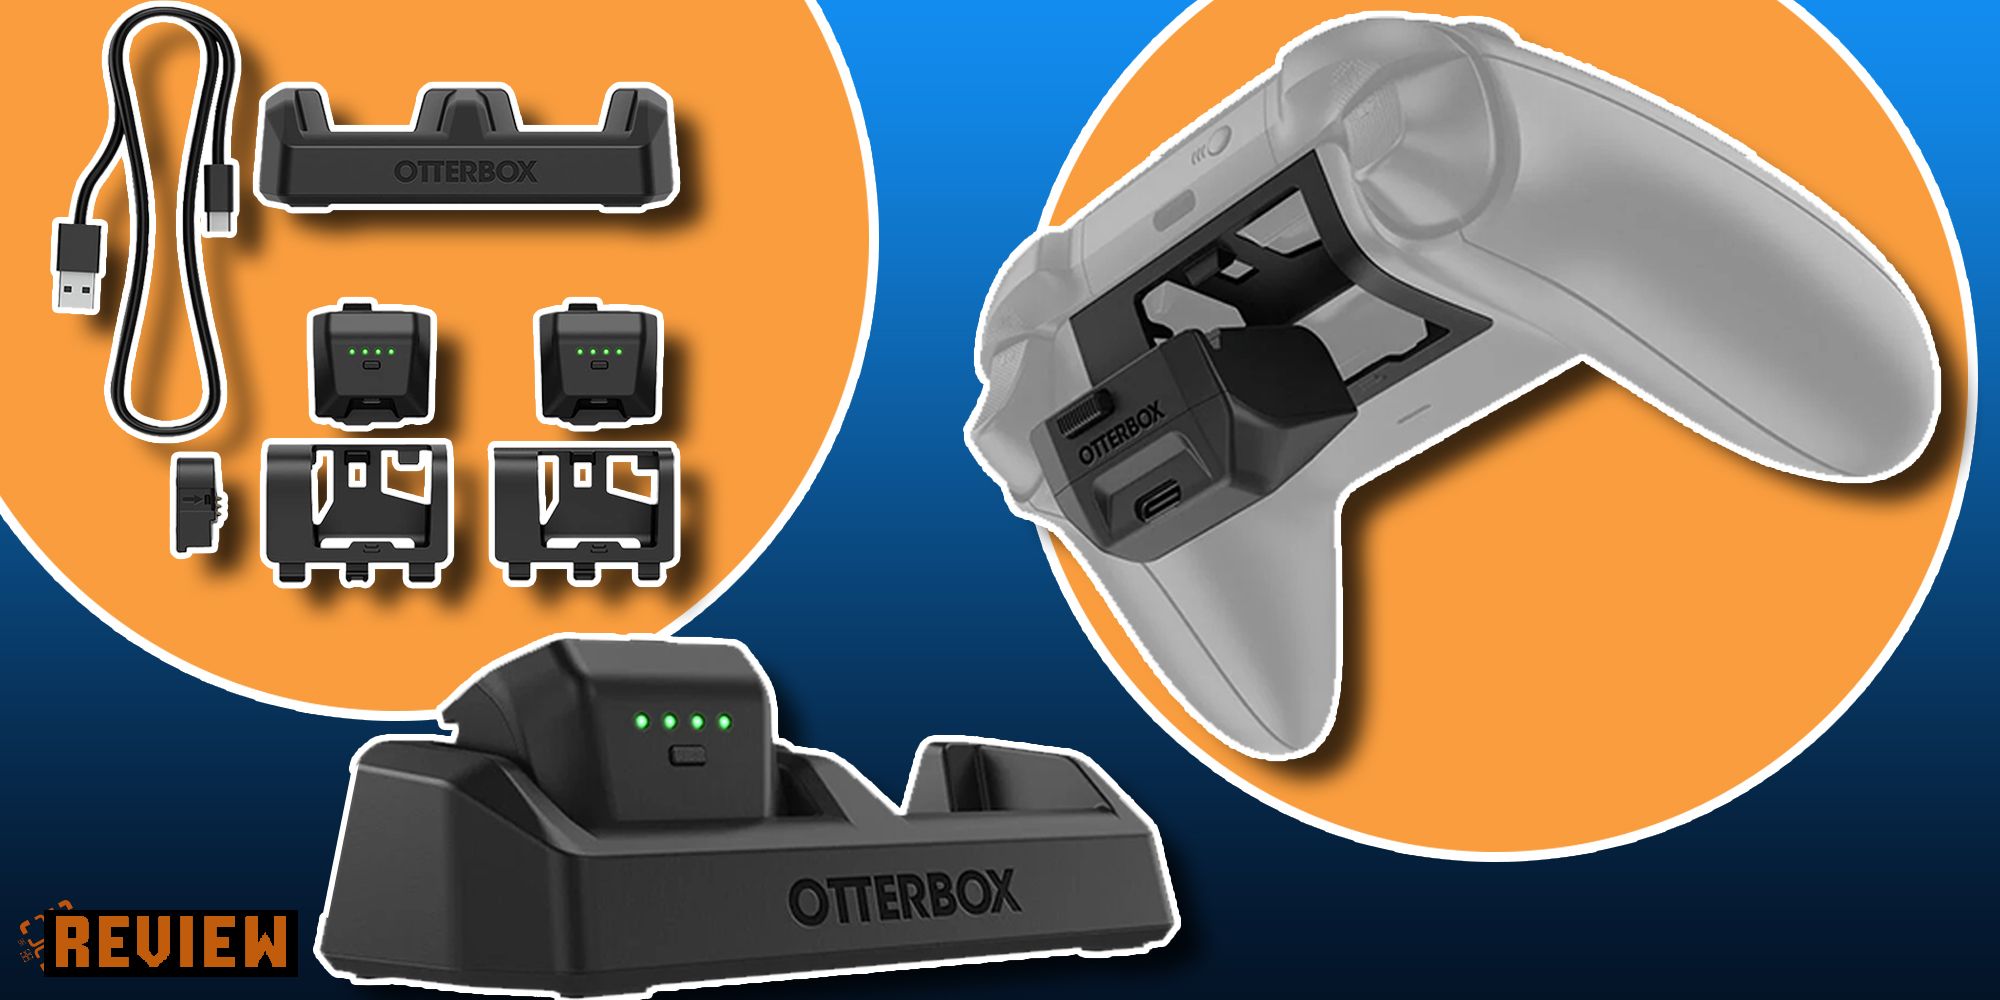 OtterBox Hot Swap Controller Batteries for Xbox One and Xbox Series X|S, 2  Batteries And Charging Dock Included